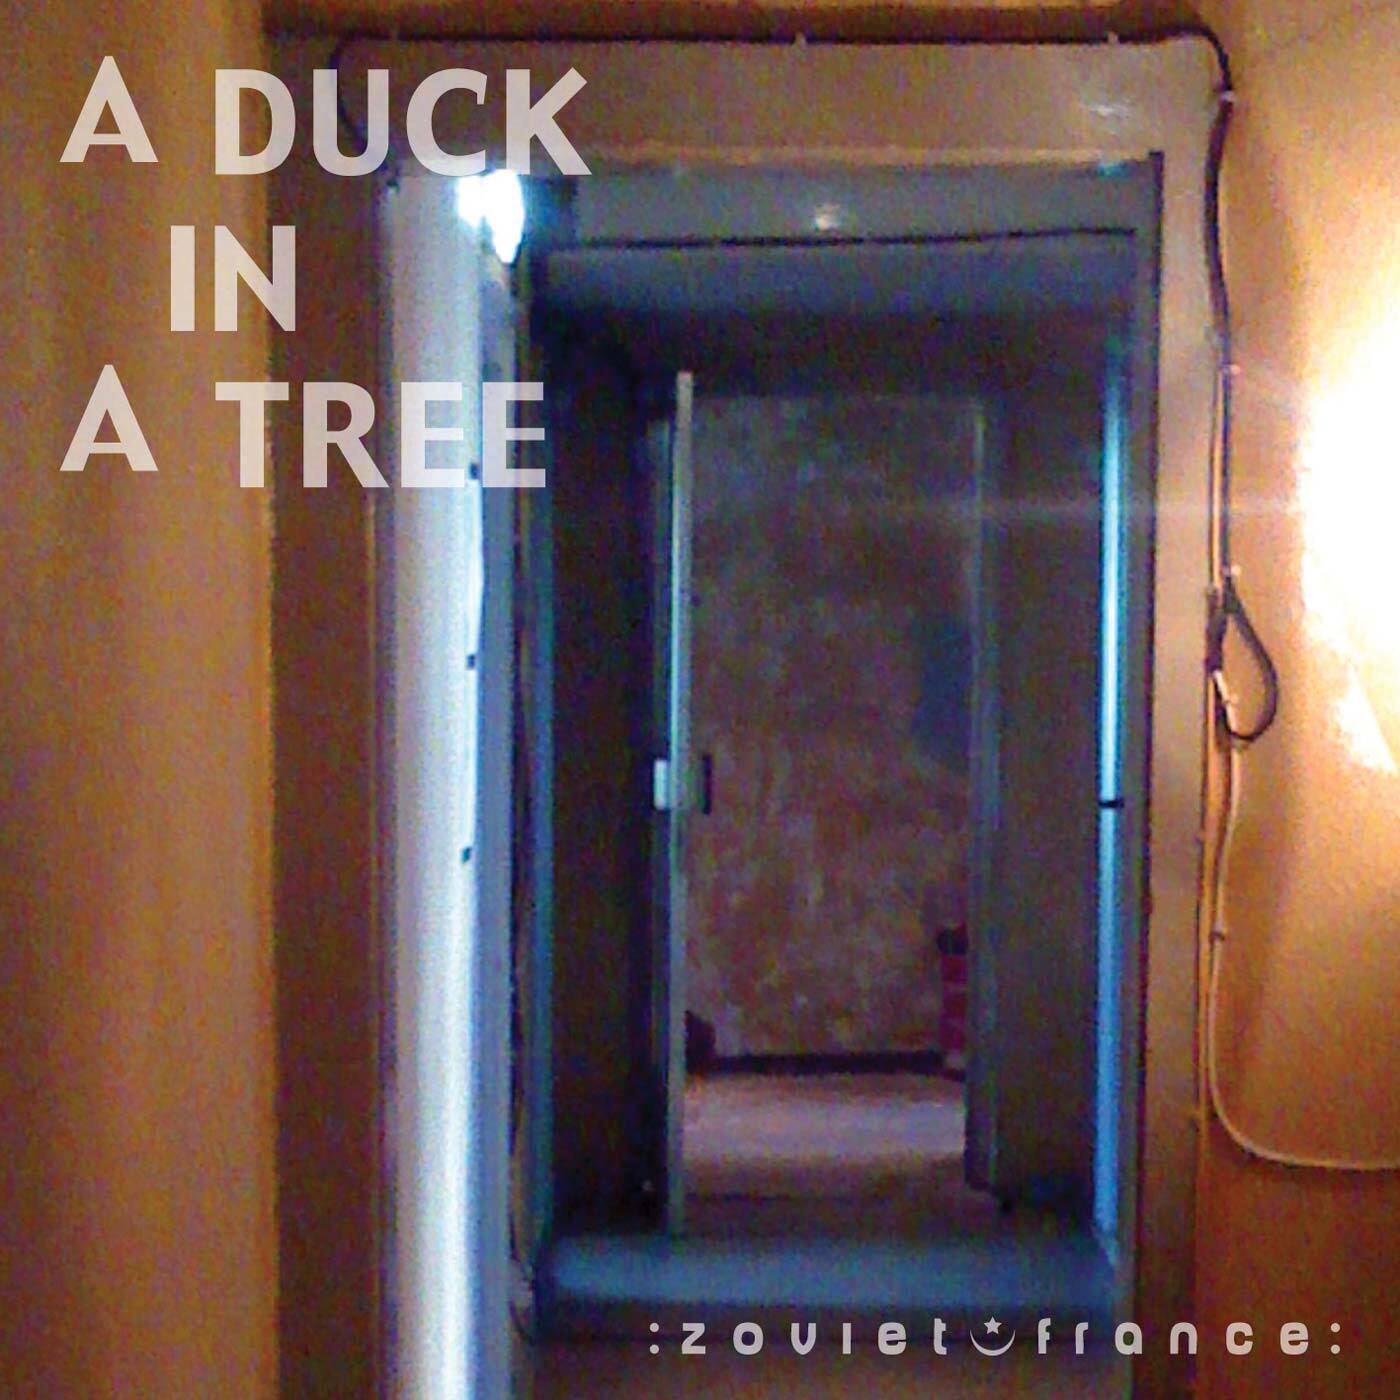 A-Duck-in-a-Tree-2013-05-04-_-If-Anyone-Knows-You-Know-layout-1400.jpg